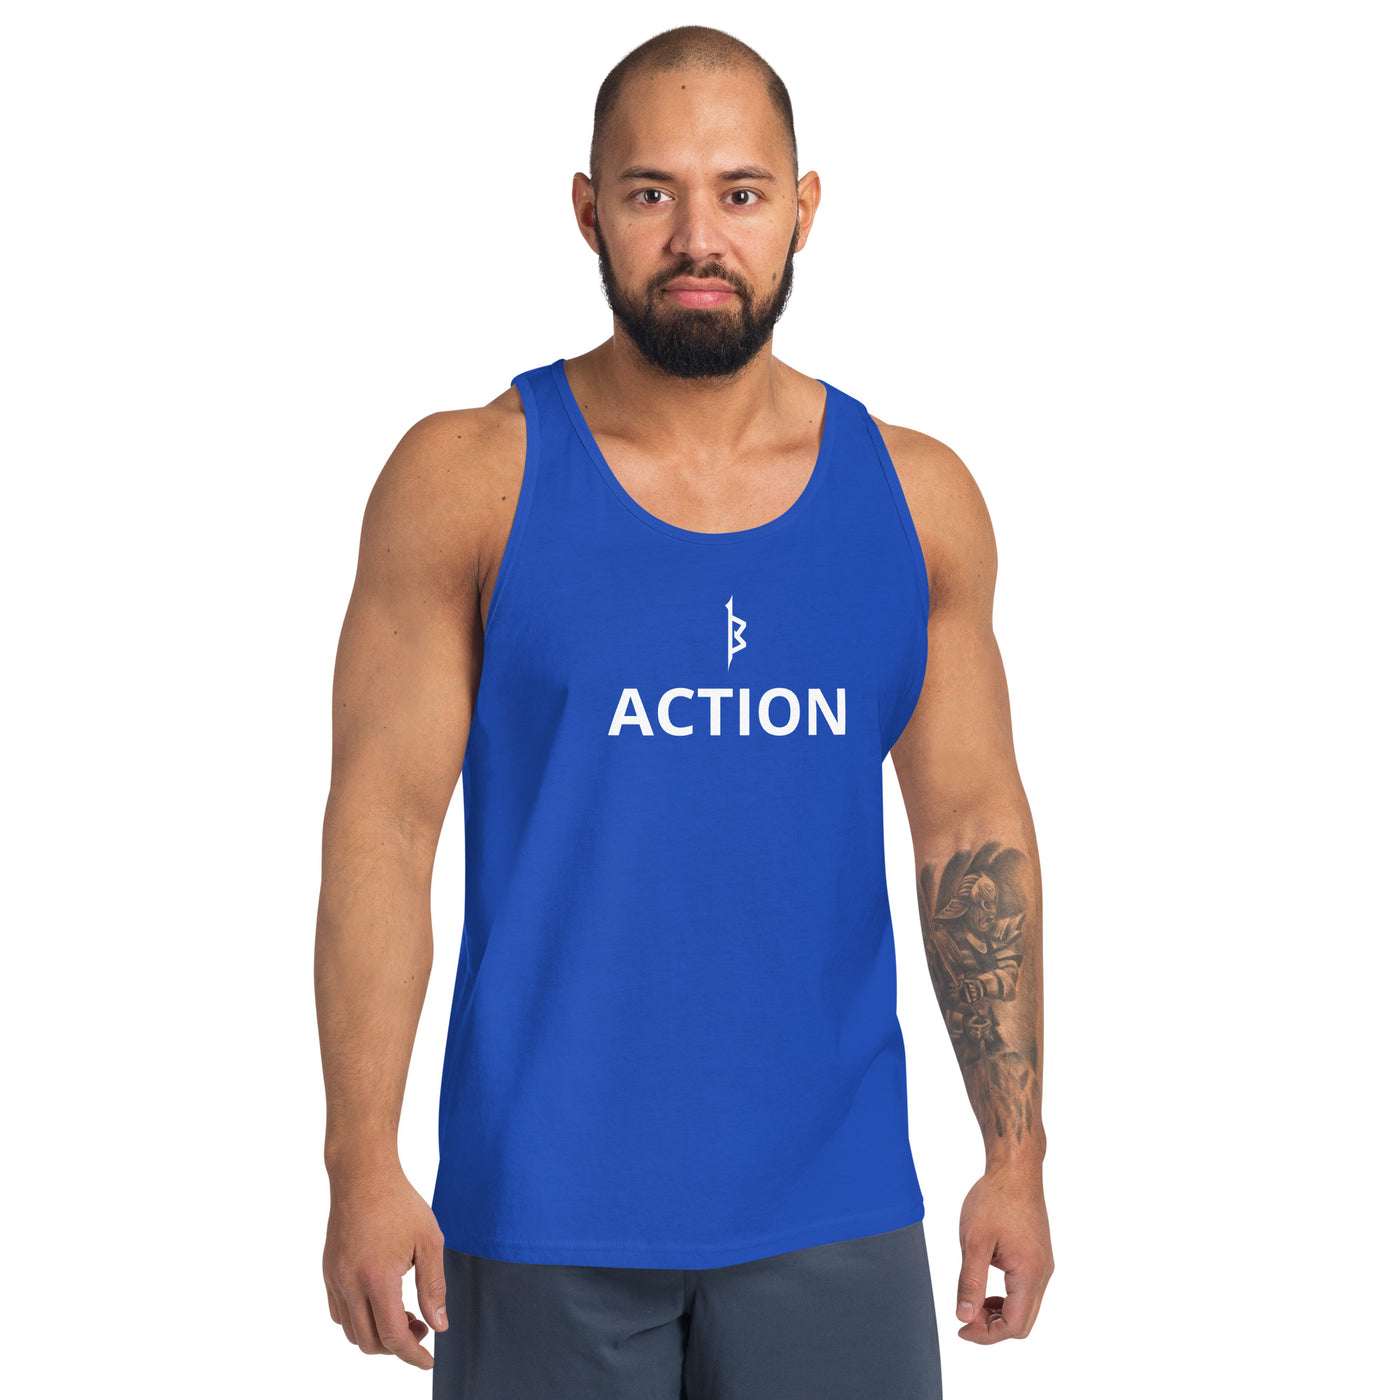 ACTION 2.0 TANK TOP